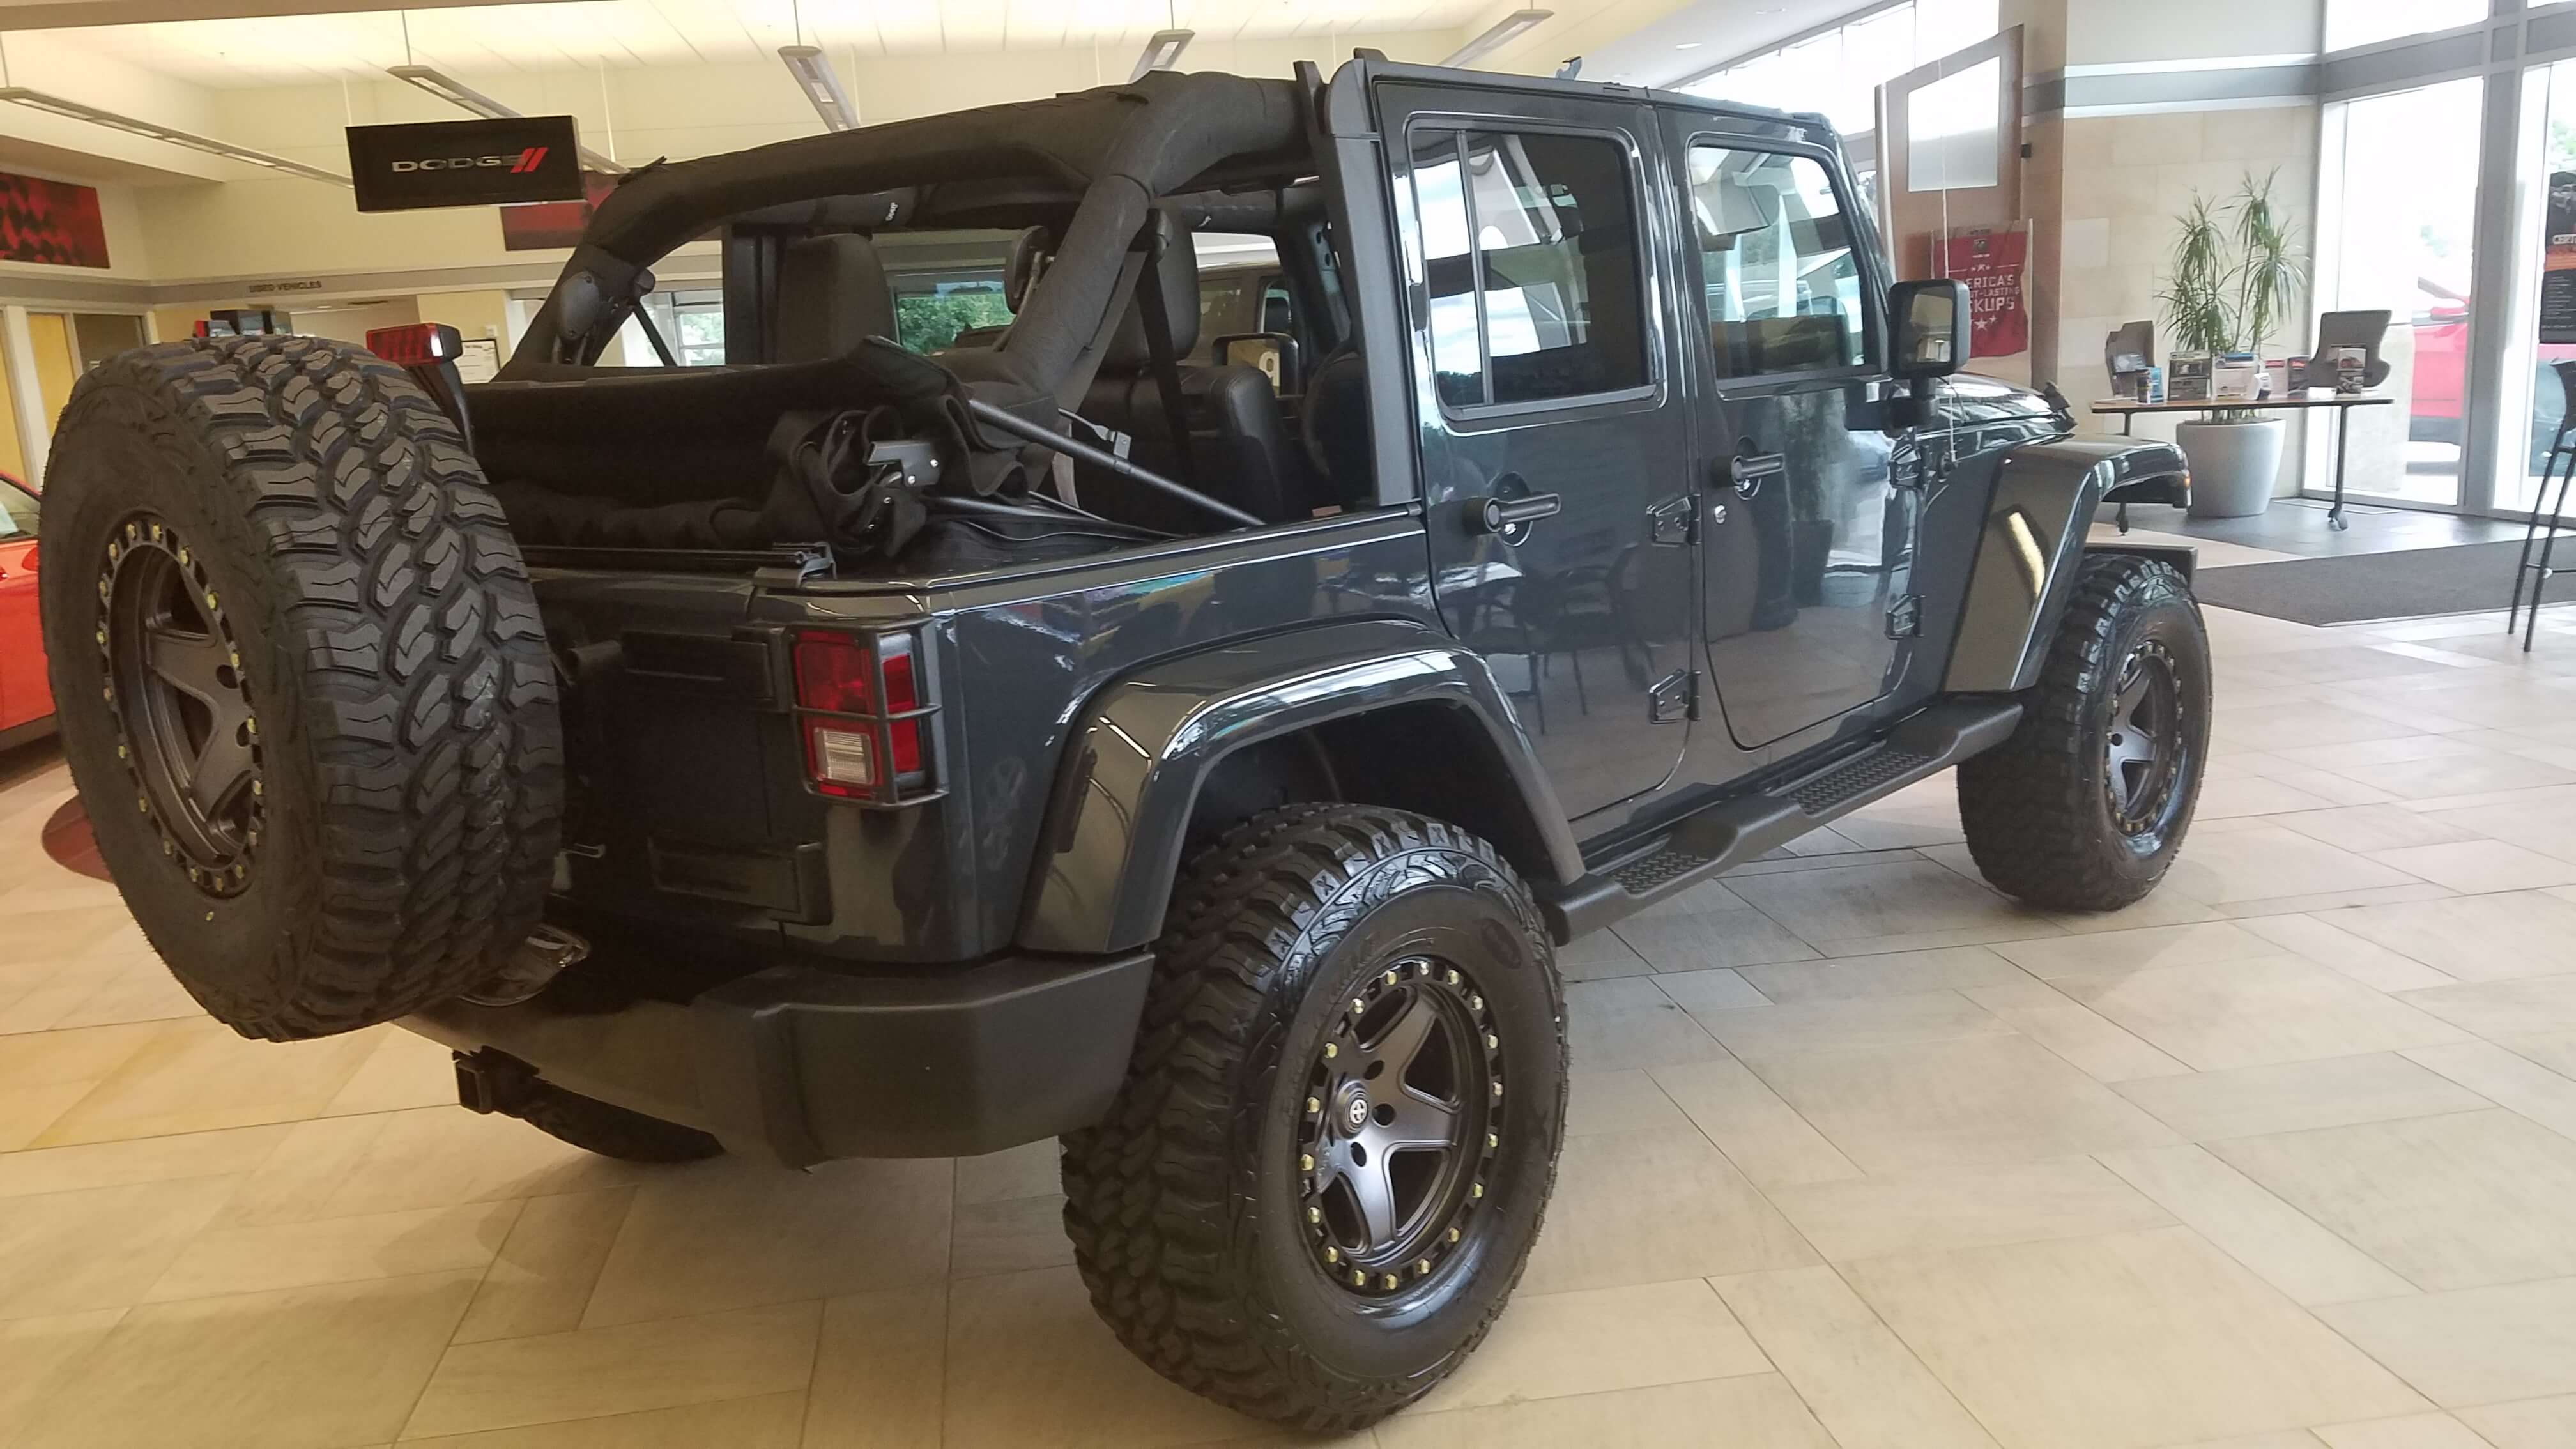 Dual top Group - Set up directly from the factory for summer fun and added versatility in the winter.  The dual top group is the most cost effective way to get everything that you want out of your adventures.  This Jeep also comes with color matched flares and top for a refined look